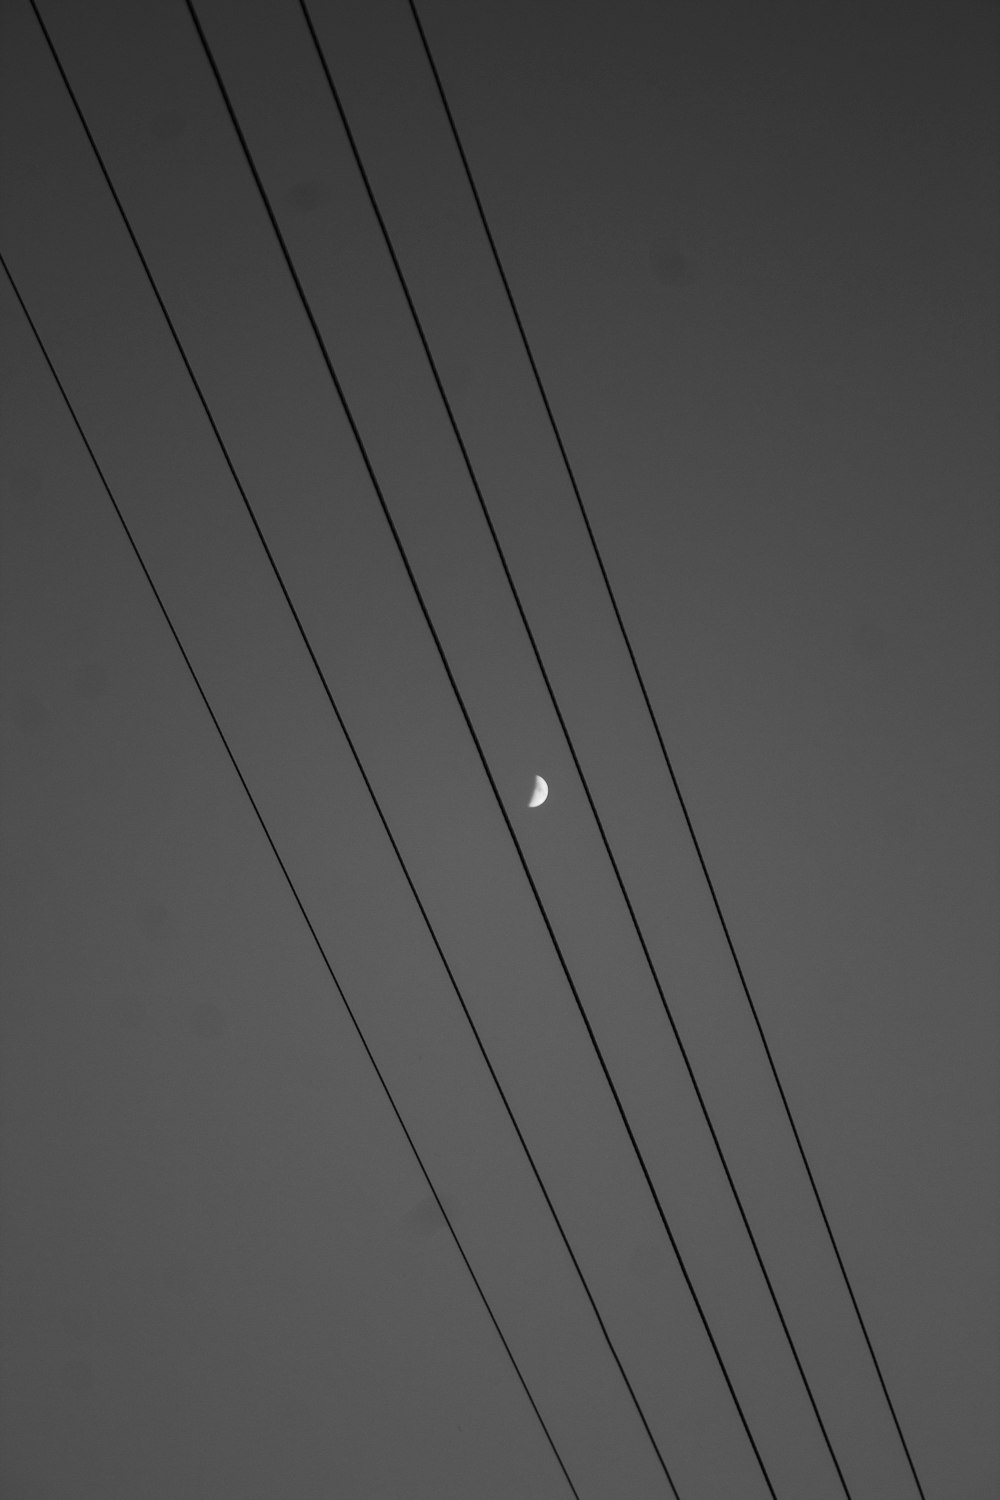 a black and white photo of power lines with the moon in the distance